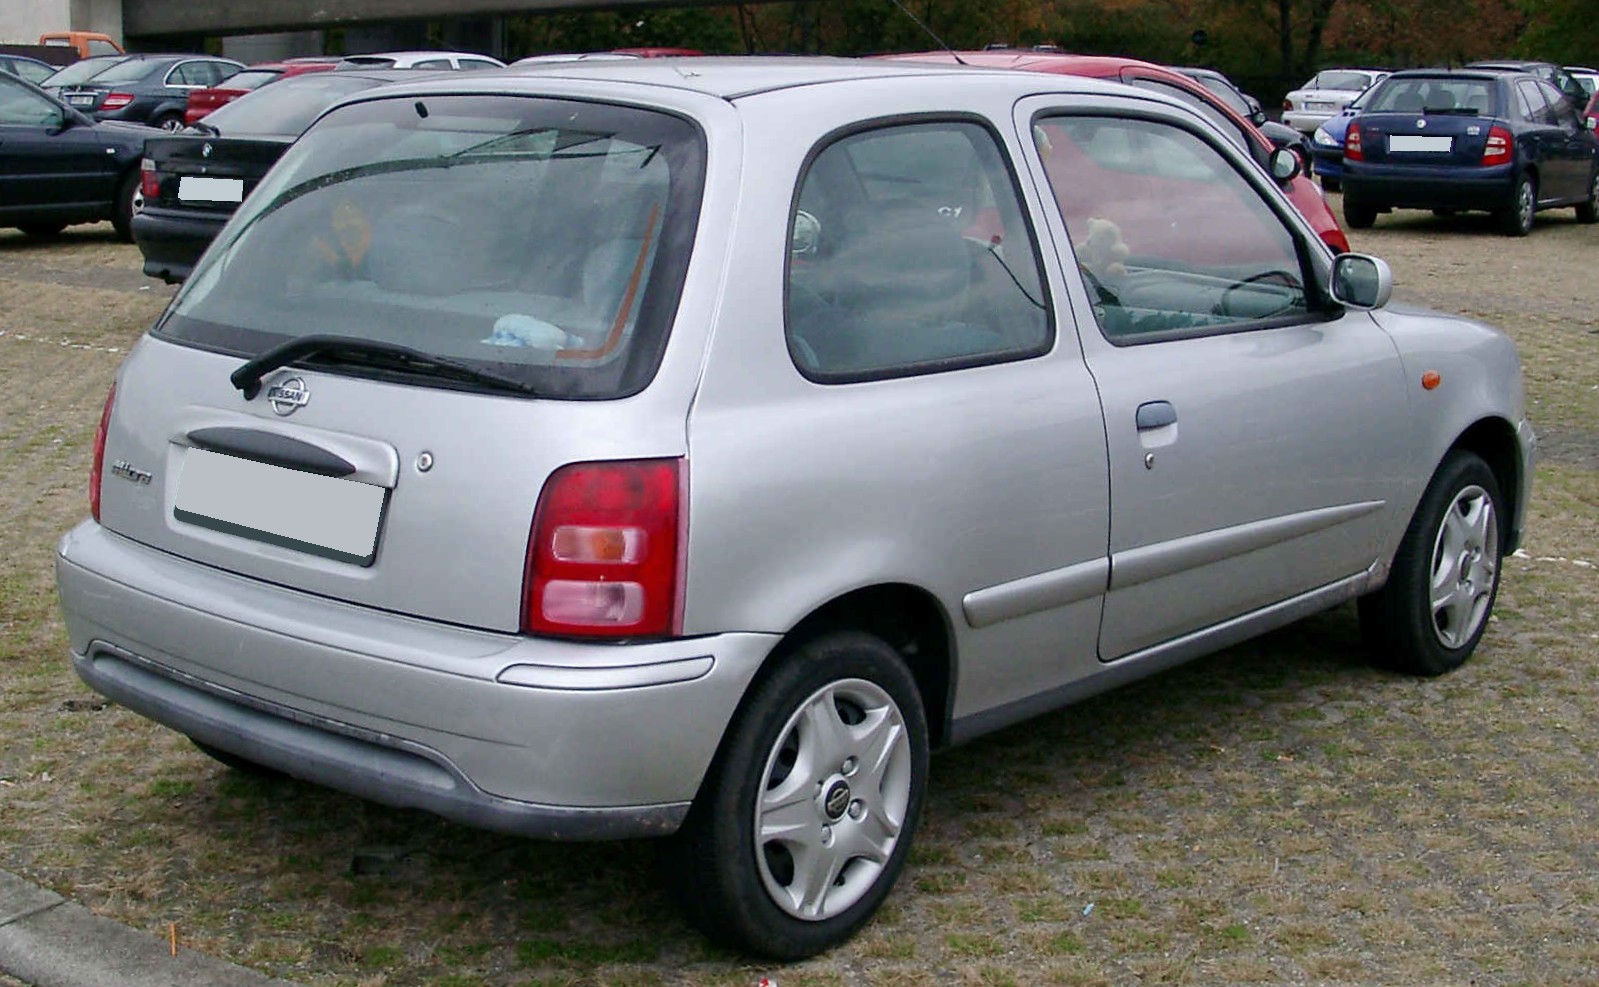 File:Nissan Micra front 20081017.jpg - Wikimedia Commons